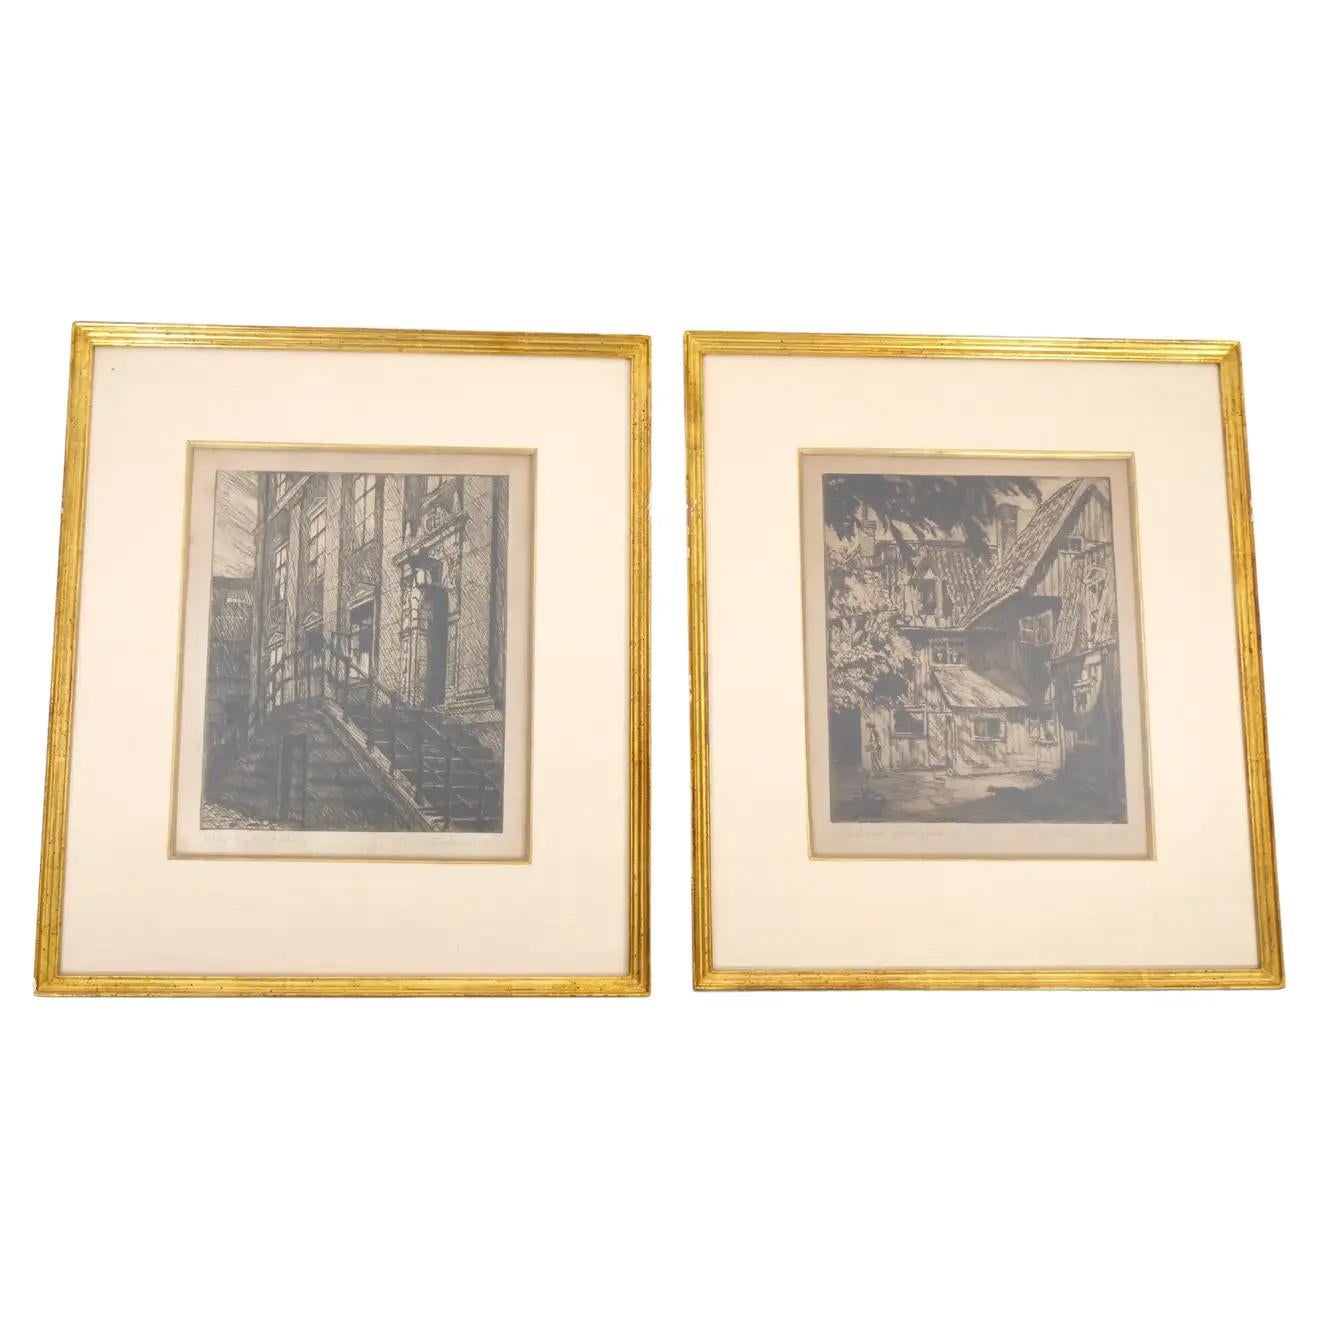 Two Framed Architectural Etchings by Olle Hjortzberg (1872-1959) For Sale 5